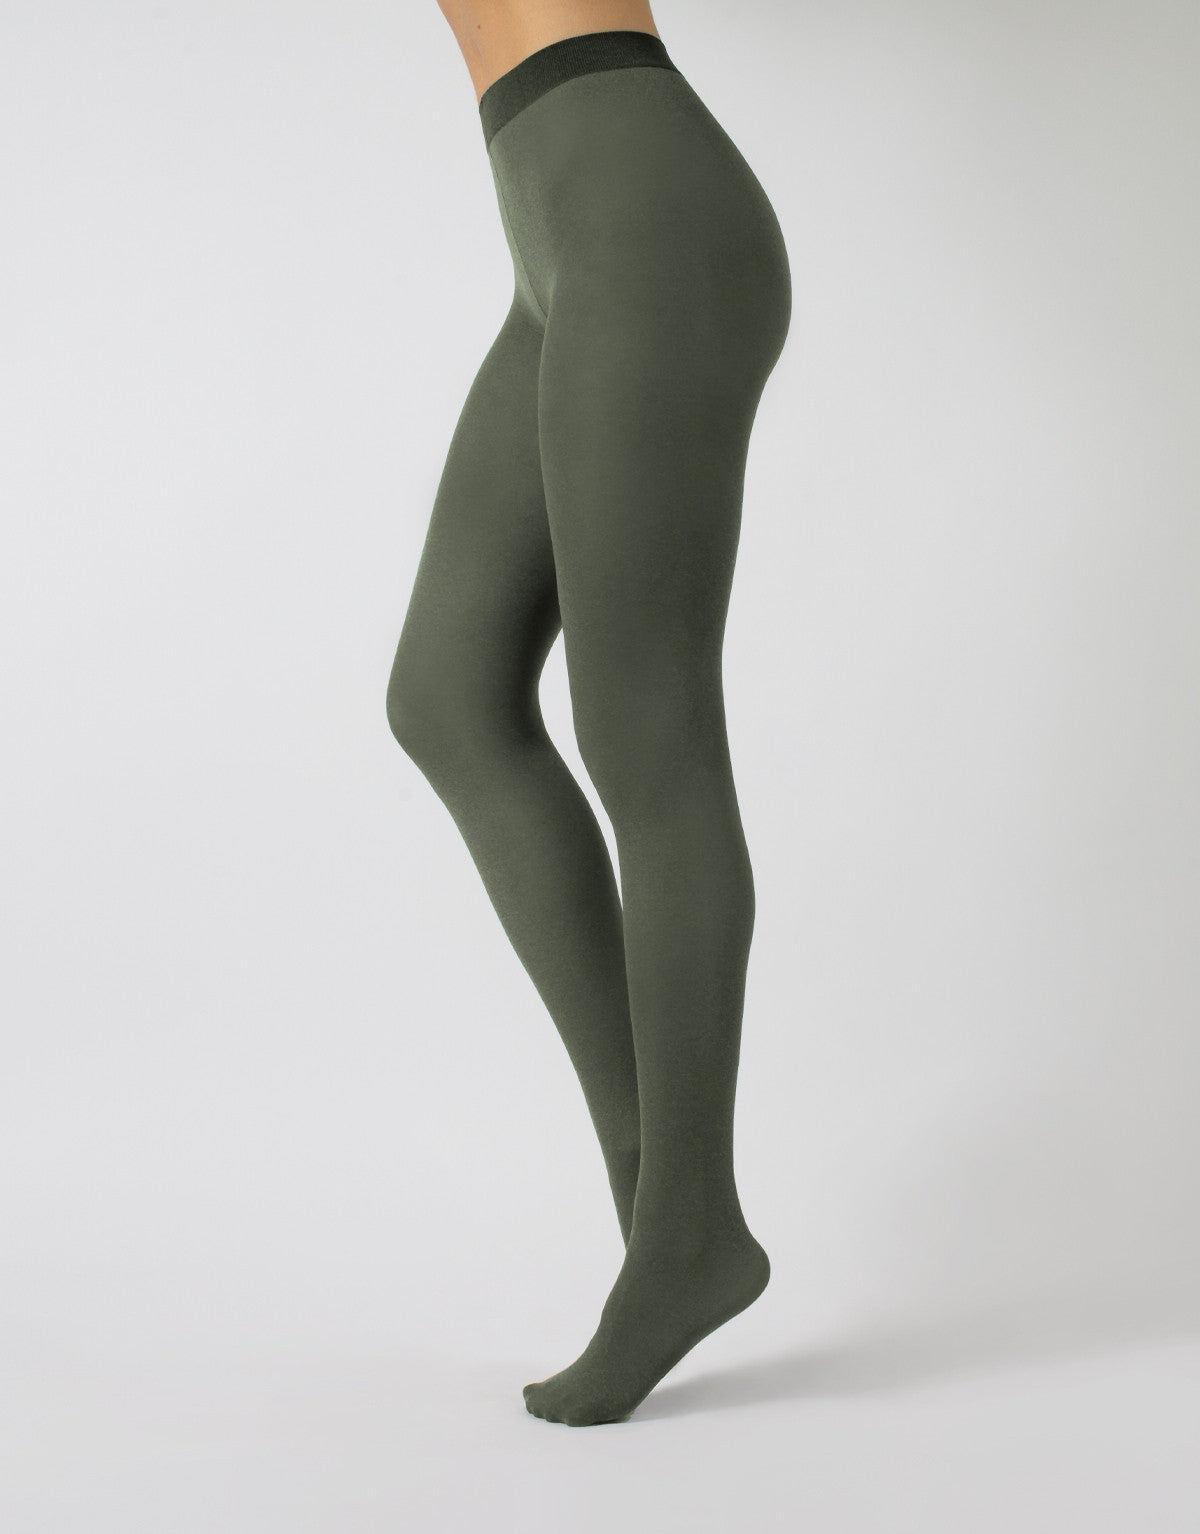 Calzitaly Melange Seam Tights - Dark bottle green opaque fashion tights with a knitted fleck effect, white back seam.